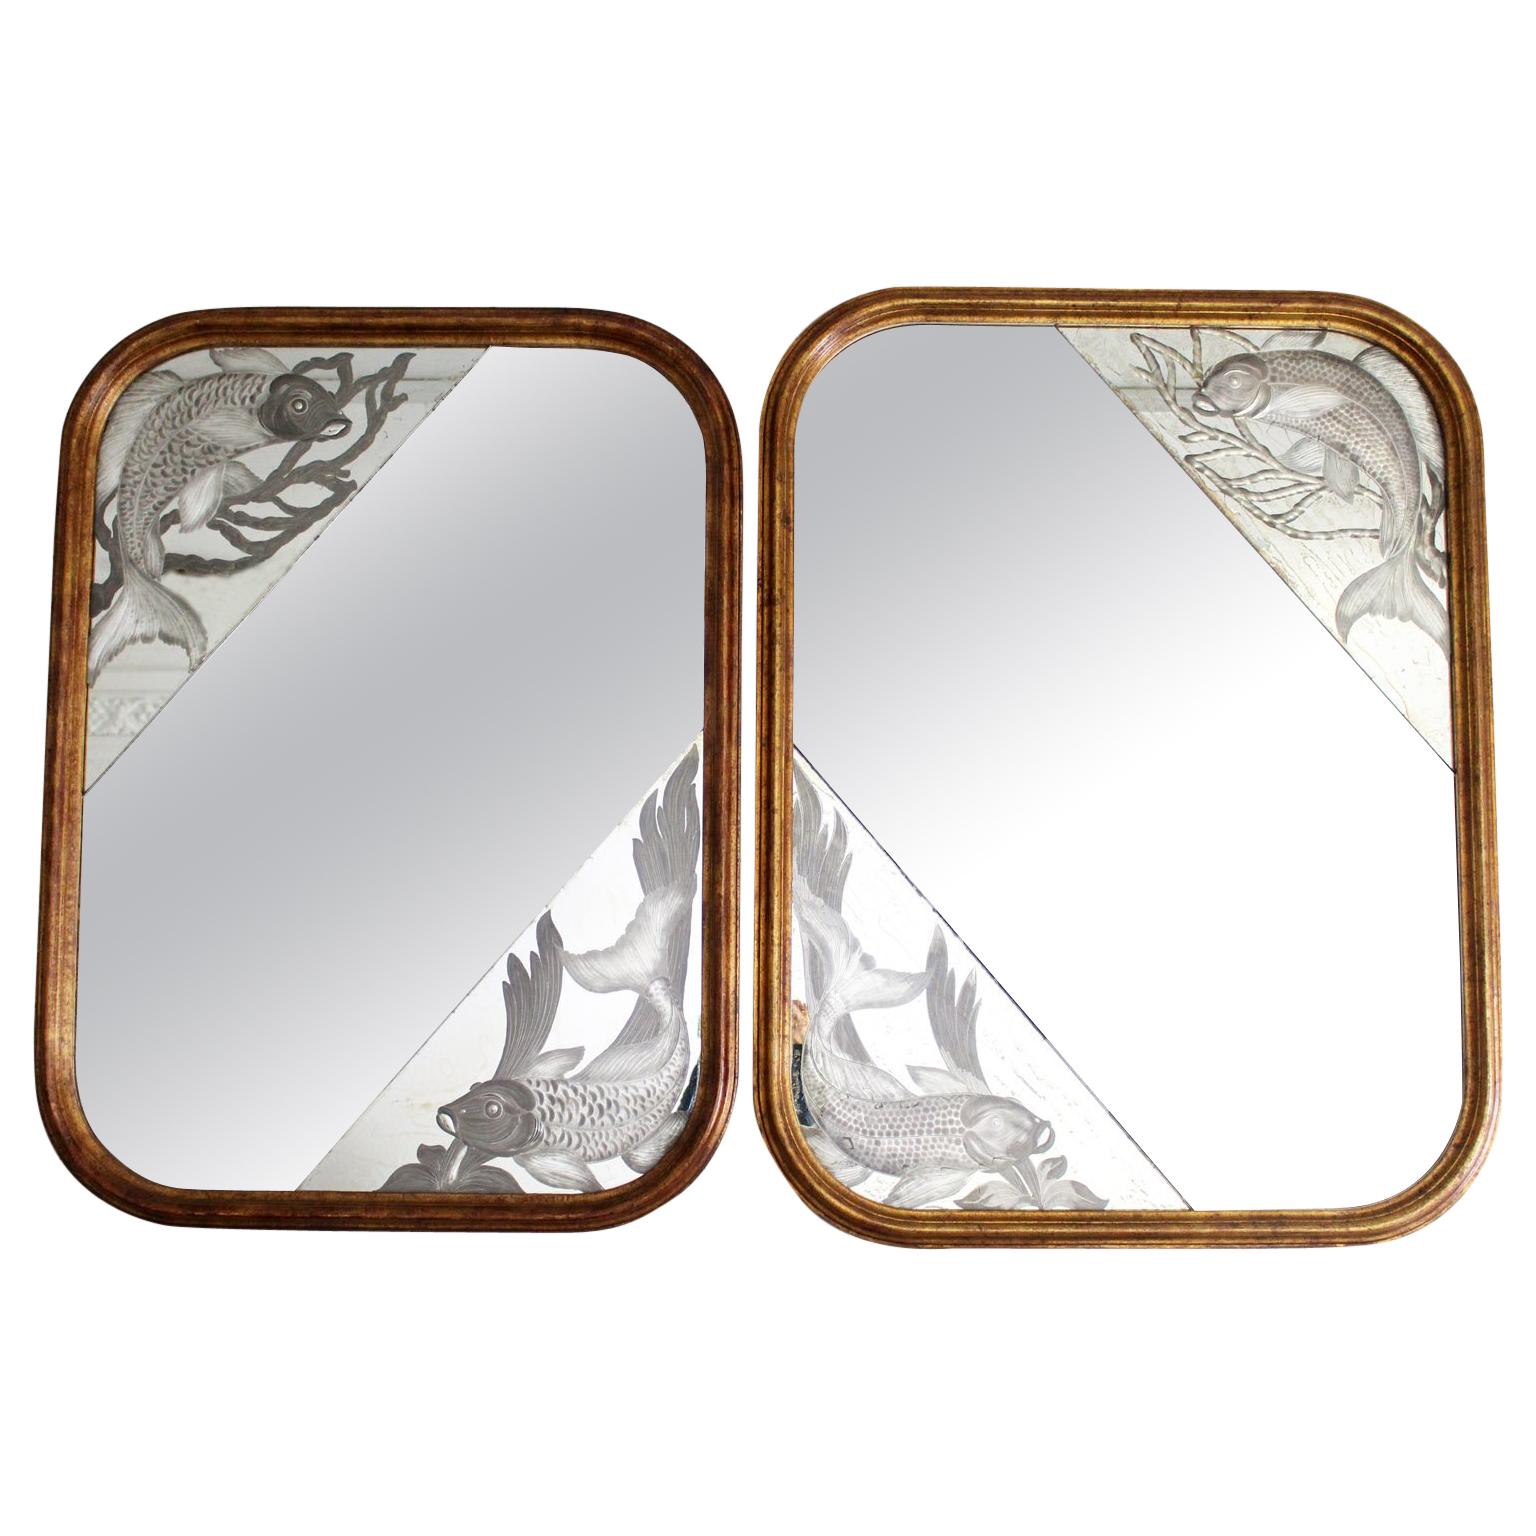 Pair of 1920s Italian Mirrors with Etched Fish and Gilt Frames